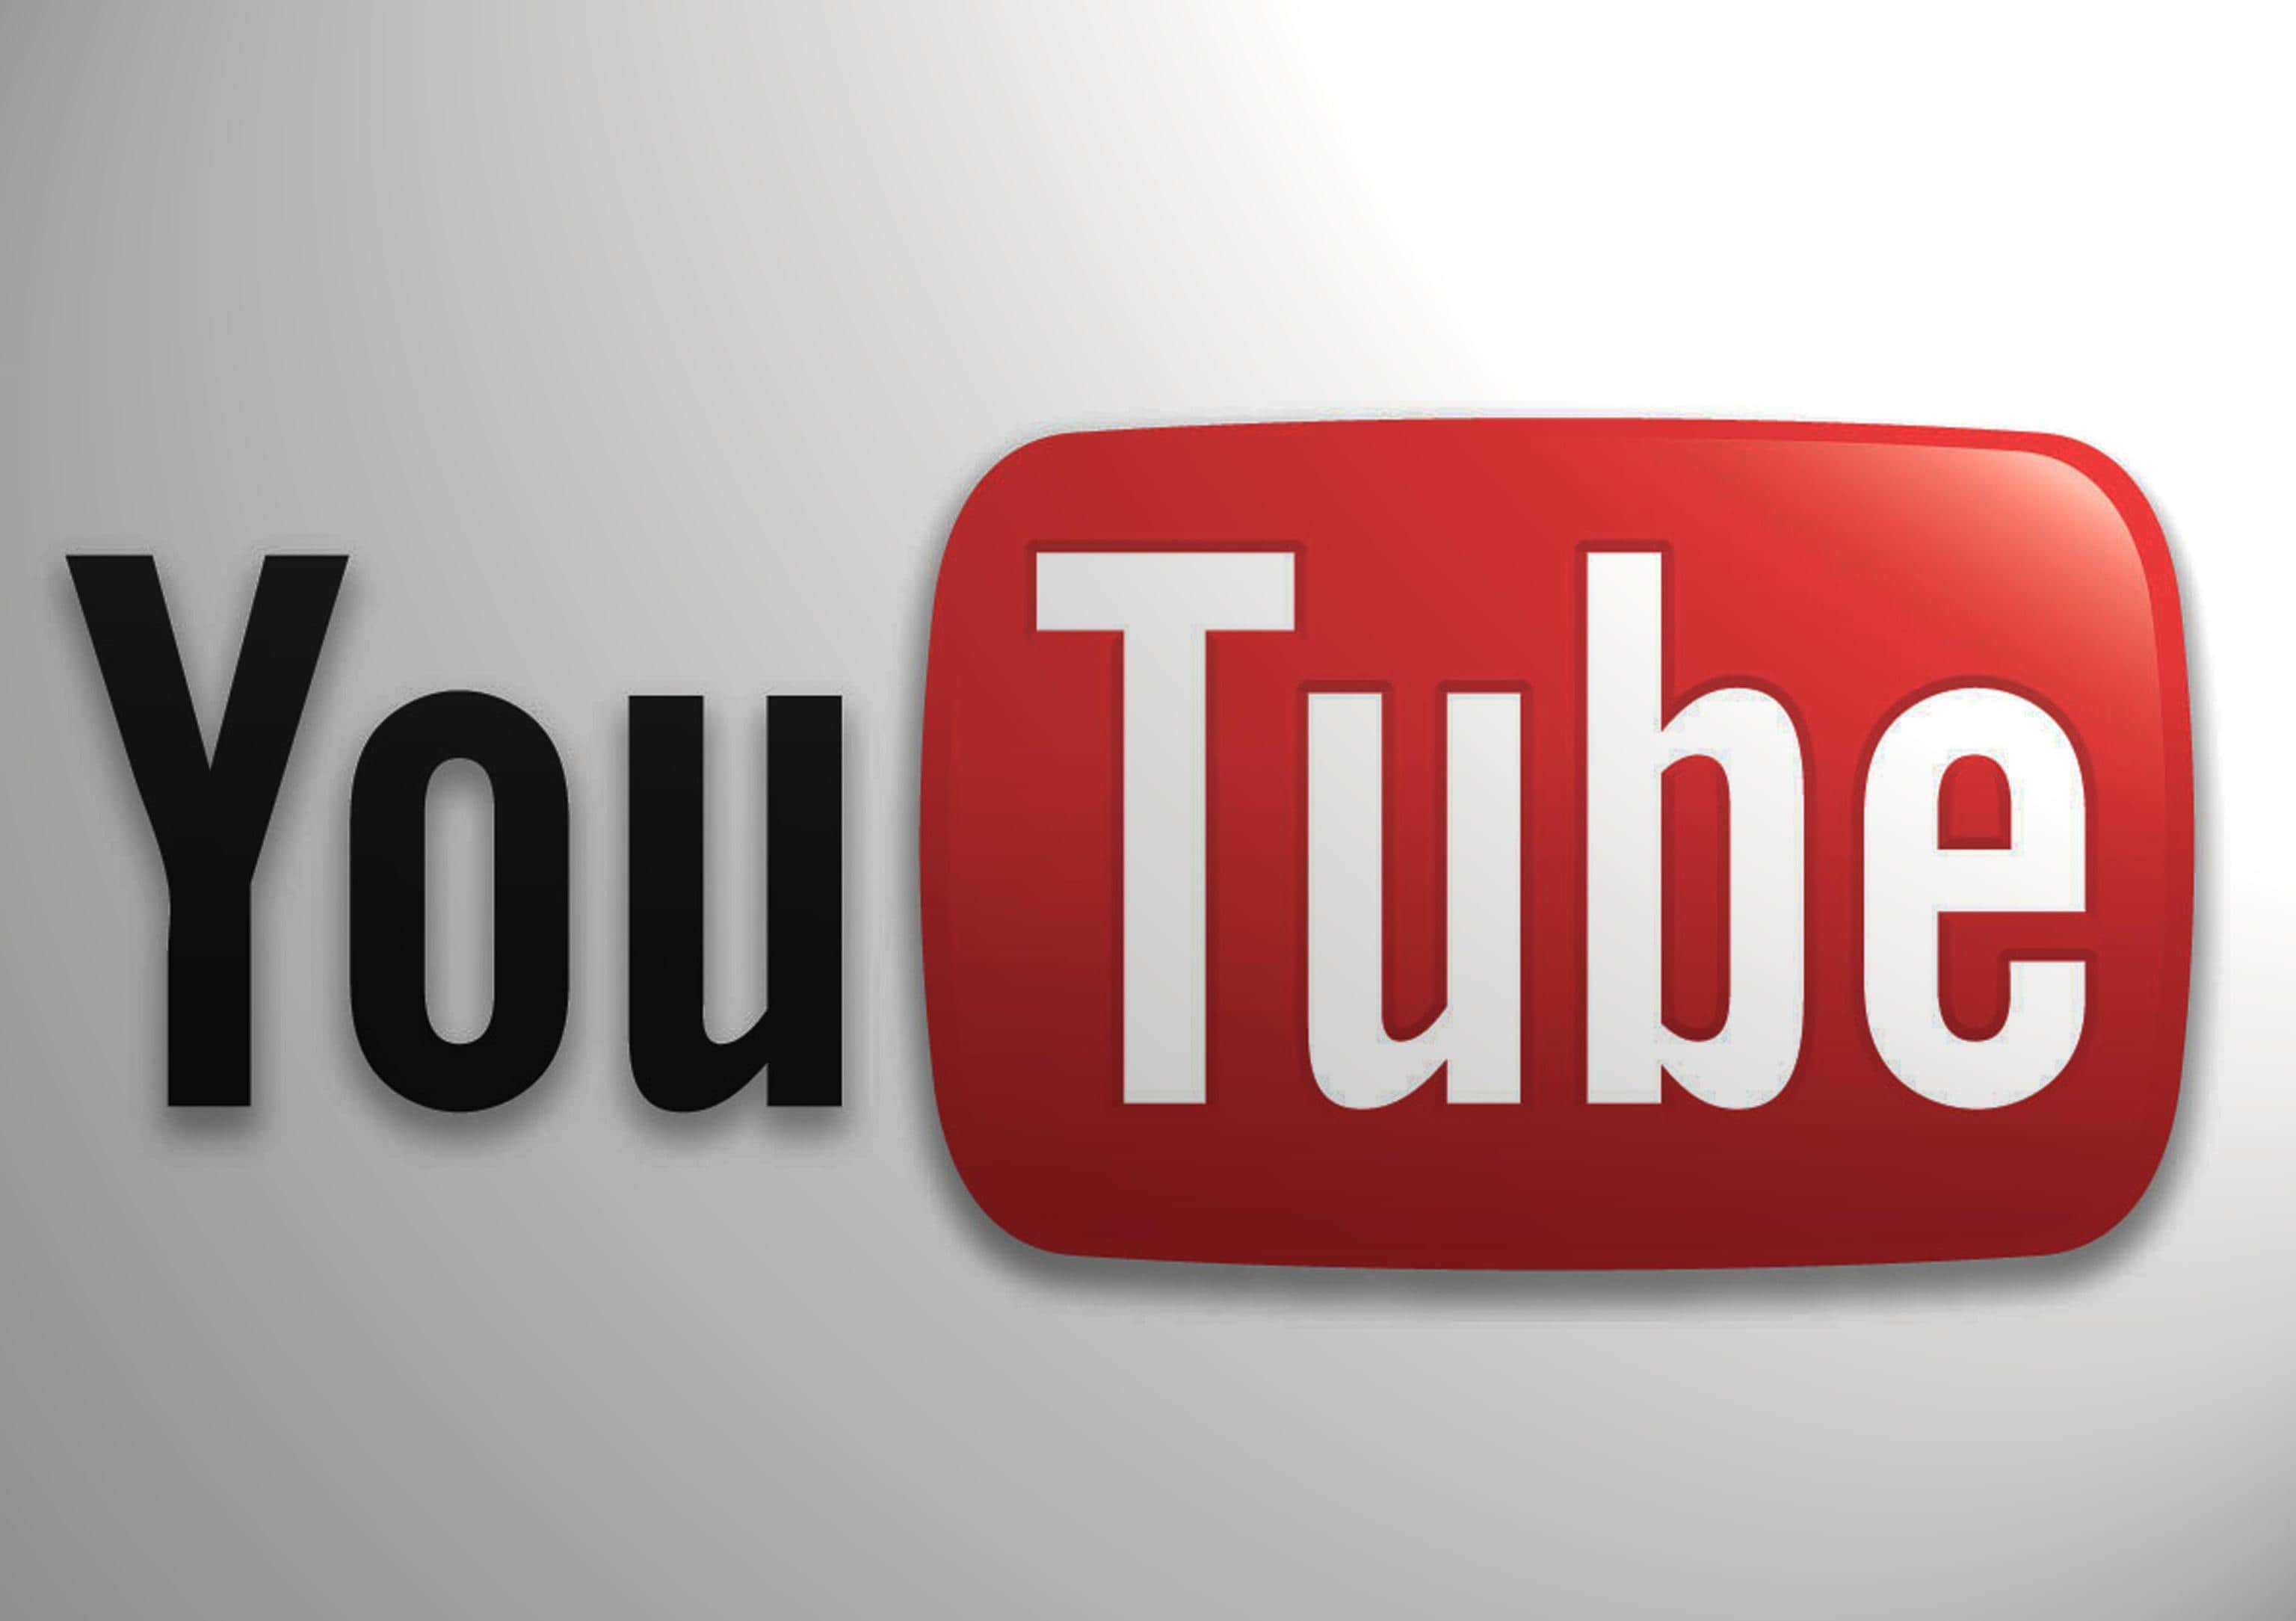 YouTube will hide “dislikes” to create a more inclusive environment